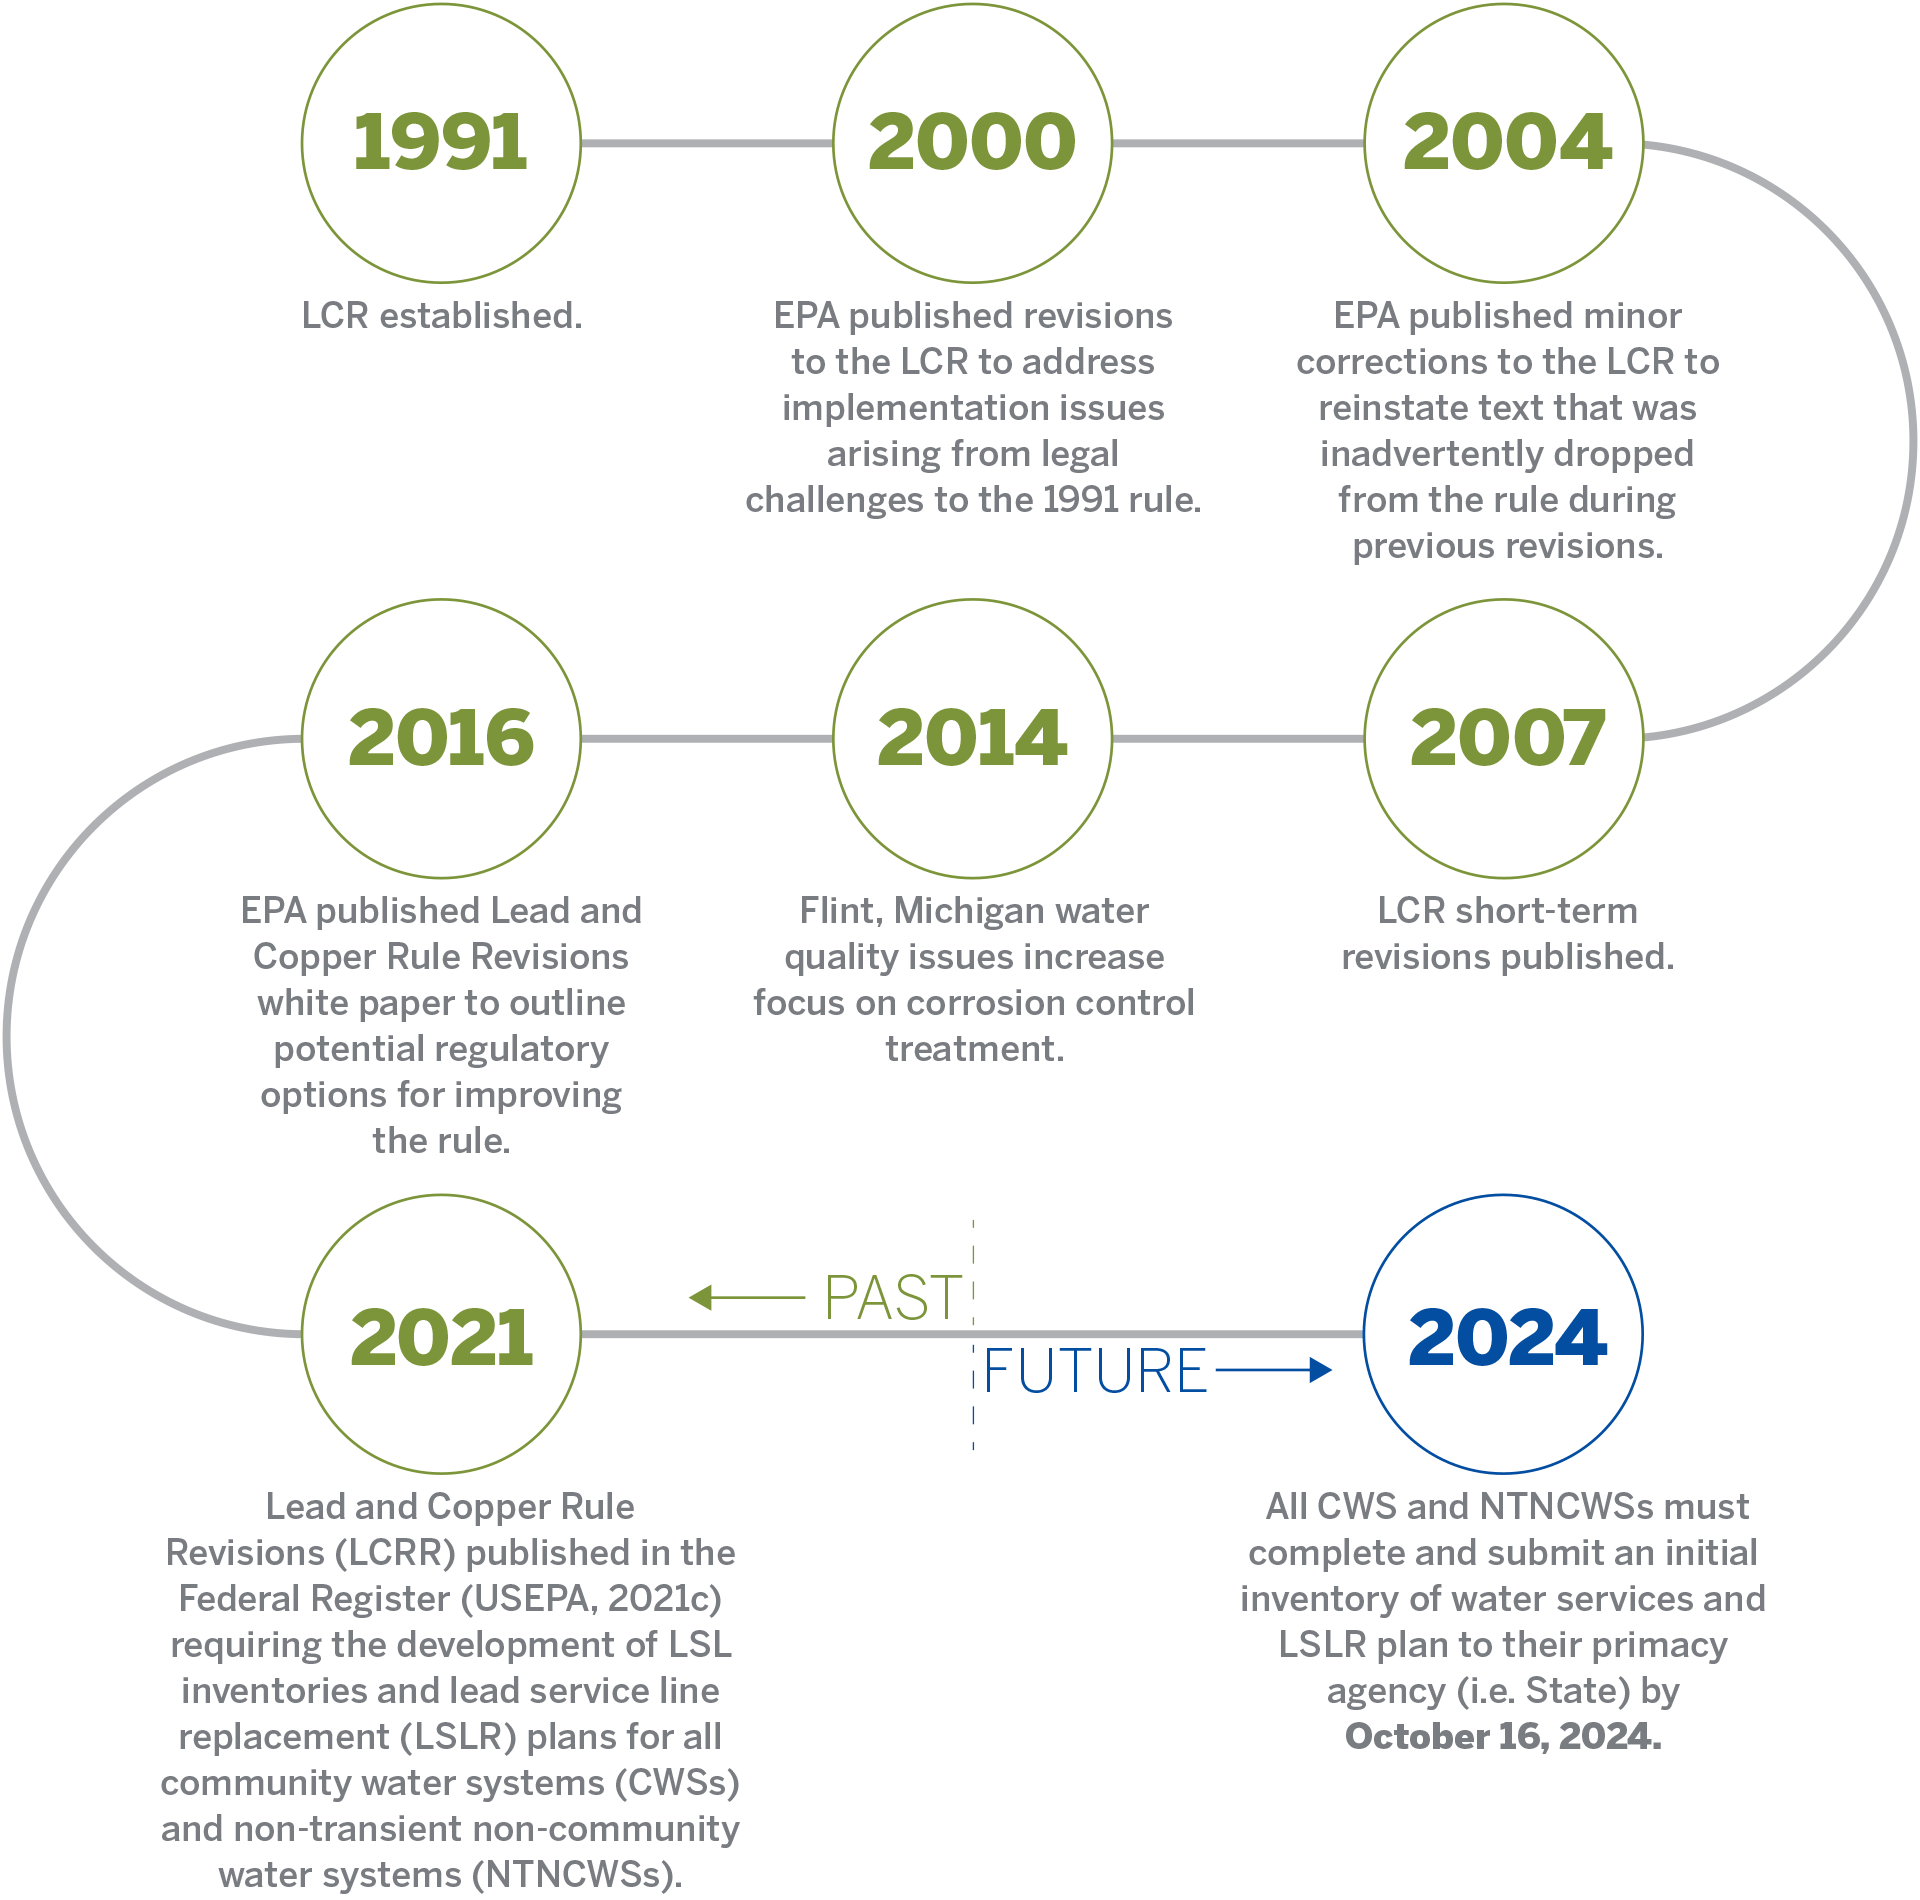 Timeline of EPA Lead and Copper Rules that says "1991 LCR established. 2000 EPA published revisions to the LCR to address implementation issues arising from legal challenges to the 1991 rule. 2004 EPA published minor corrections to the LCR to reinstate text that was inadvertently dropped from the rule during previous revisions. 2007 LCR short-term revisions published. 2014 Flint, Michigan water quality issues increase focus on corrosion control treatment.  2016 EPA published Lead and Copper Rule Revisions white paper to   outline potential regulatory options for improving the rule. 2021 Lead and Copper Rule Revisions (LCRR)   published in the Federal Register (USEPA, 2021c) requiring the development of LSL inventories and lead service line replacement (LSLR) plans for all CWSs and non-transient non-community water systems (NTNCWSs).  2024 All CWS and NTNCWSs must complete and submit an initial inventory of water services and LSLR plan to their primacy agency (i.e. State) by October 16, 2024."